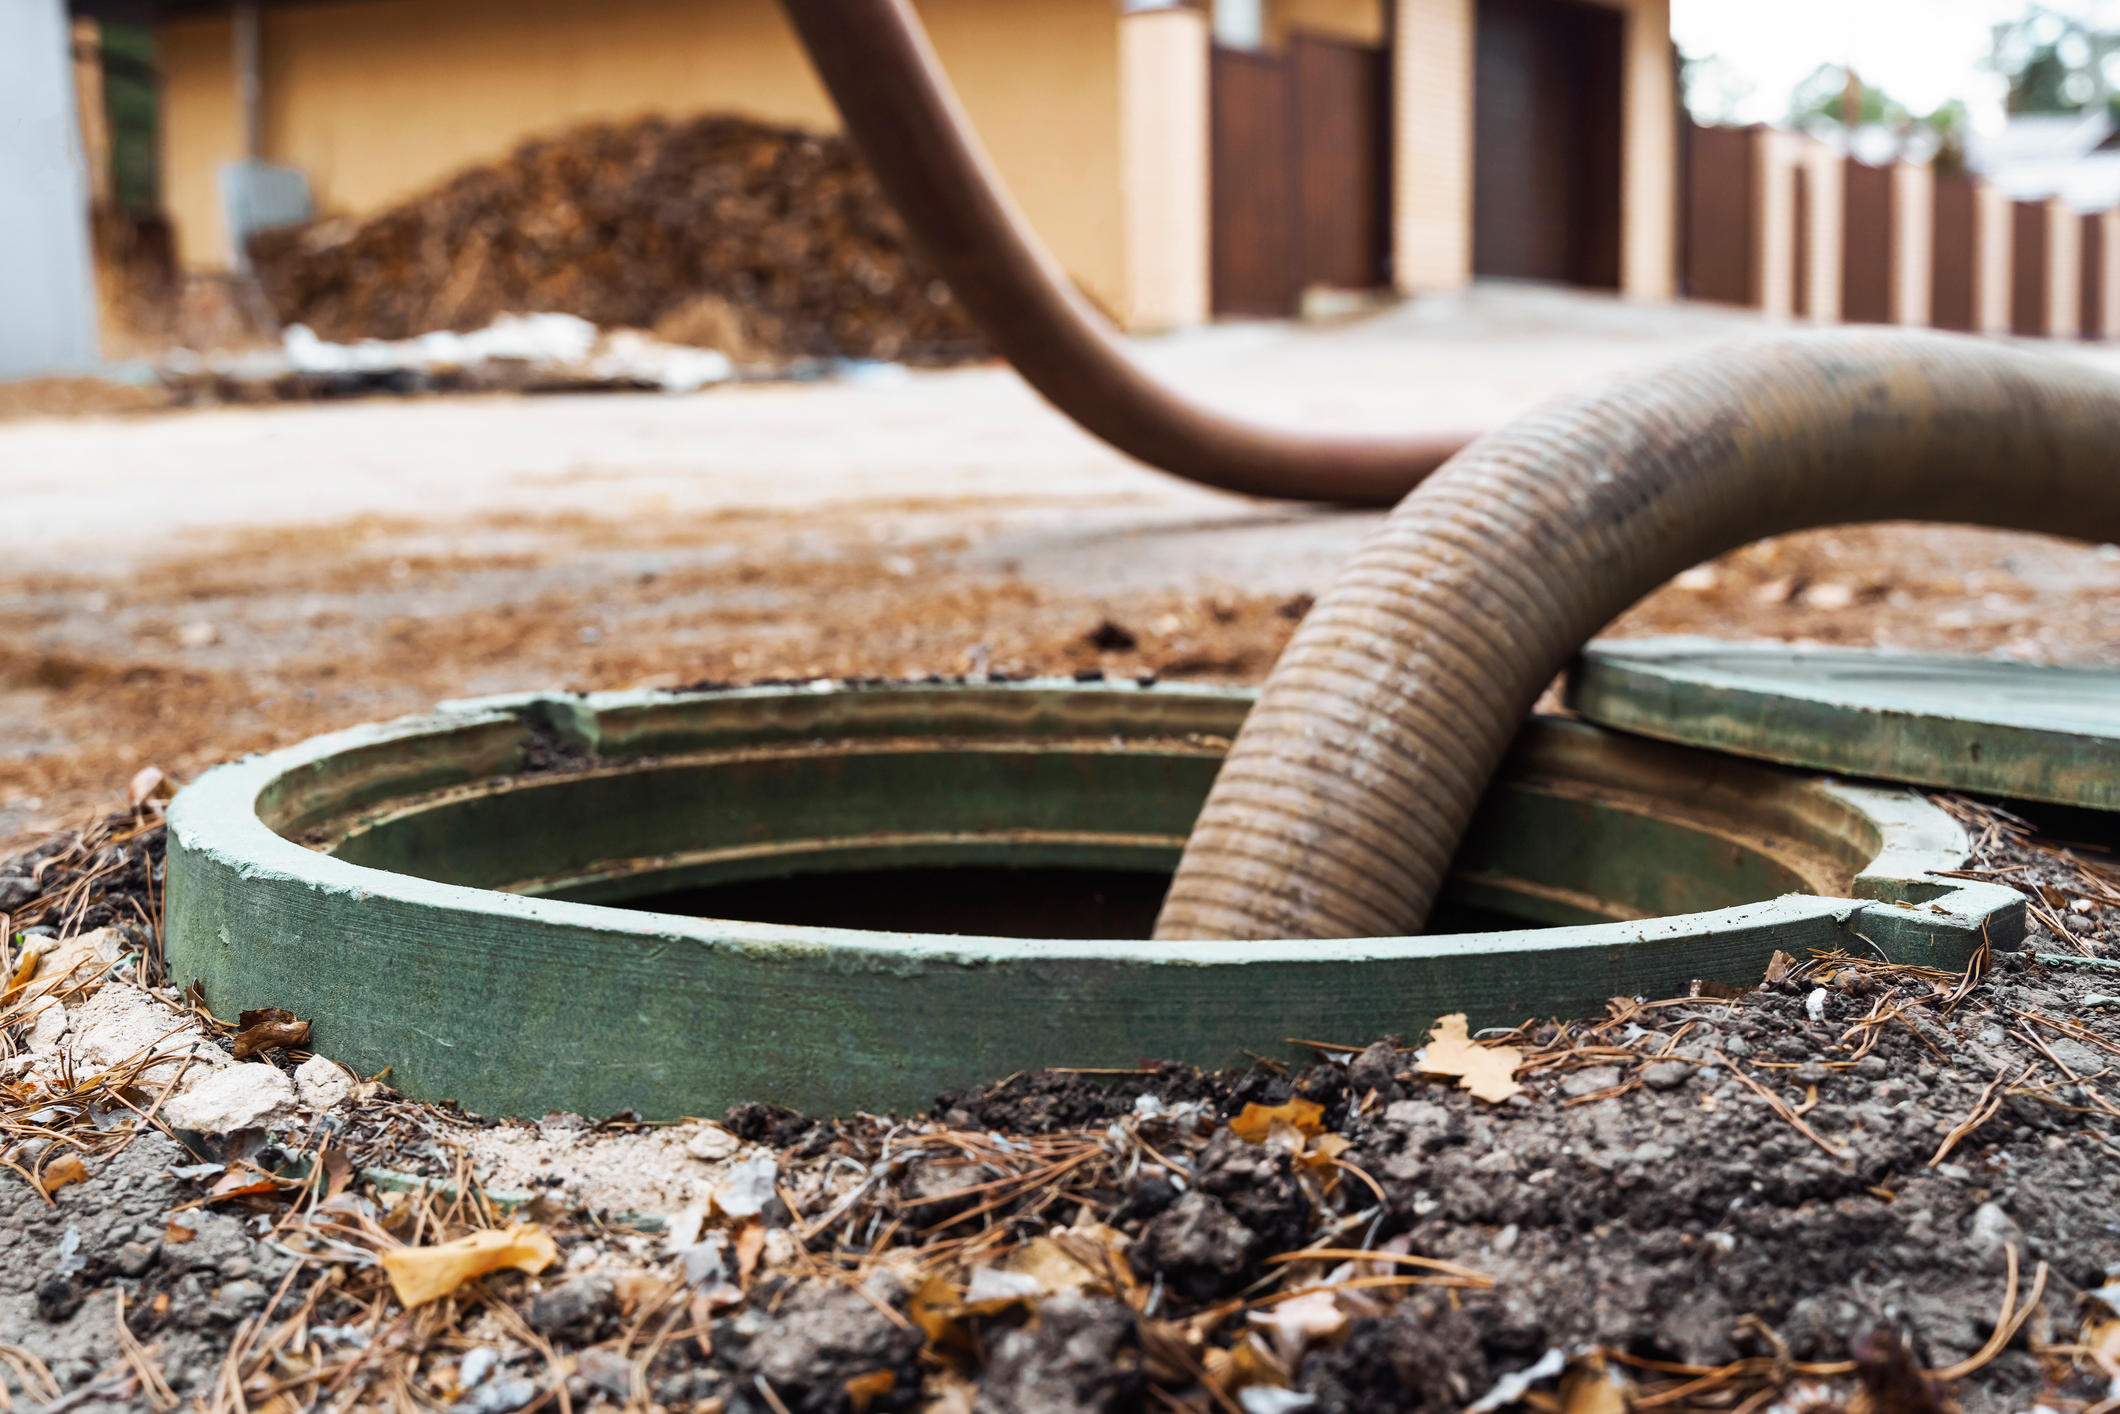 Draino is your one stop shop for all your sewer and drain needs. We are experts in effectively cleaning any sewer or drain clogs that may occur.